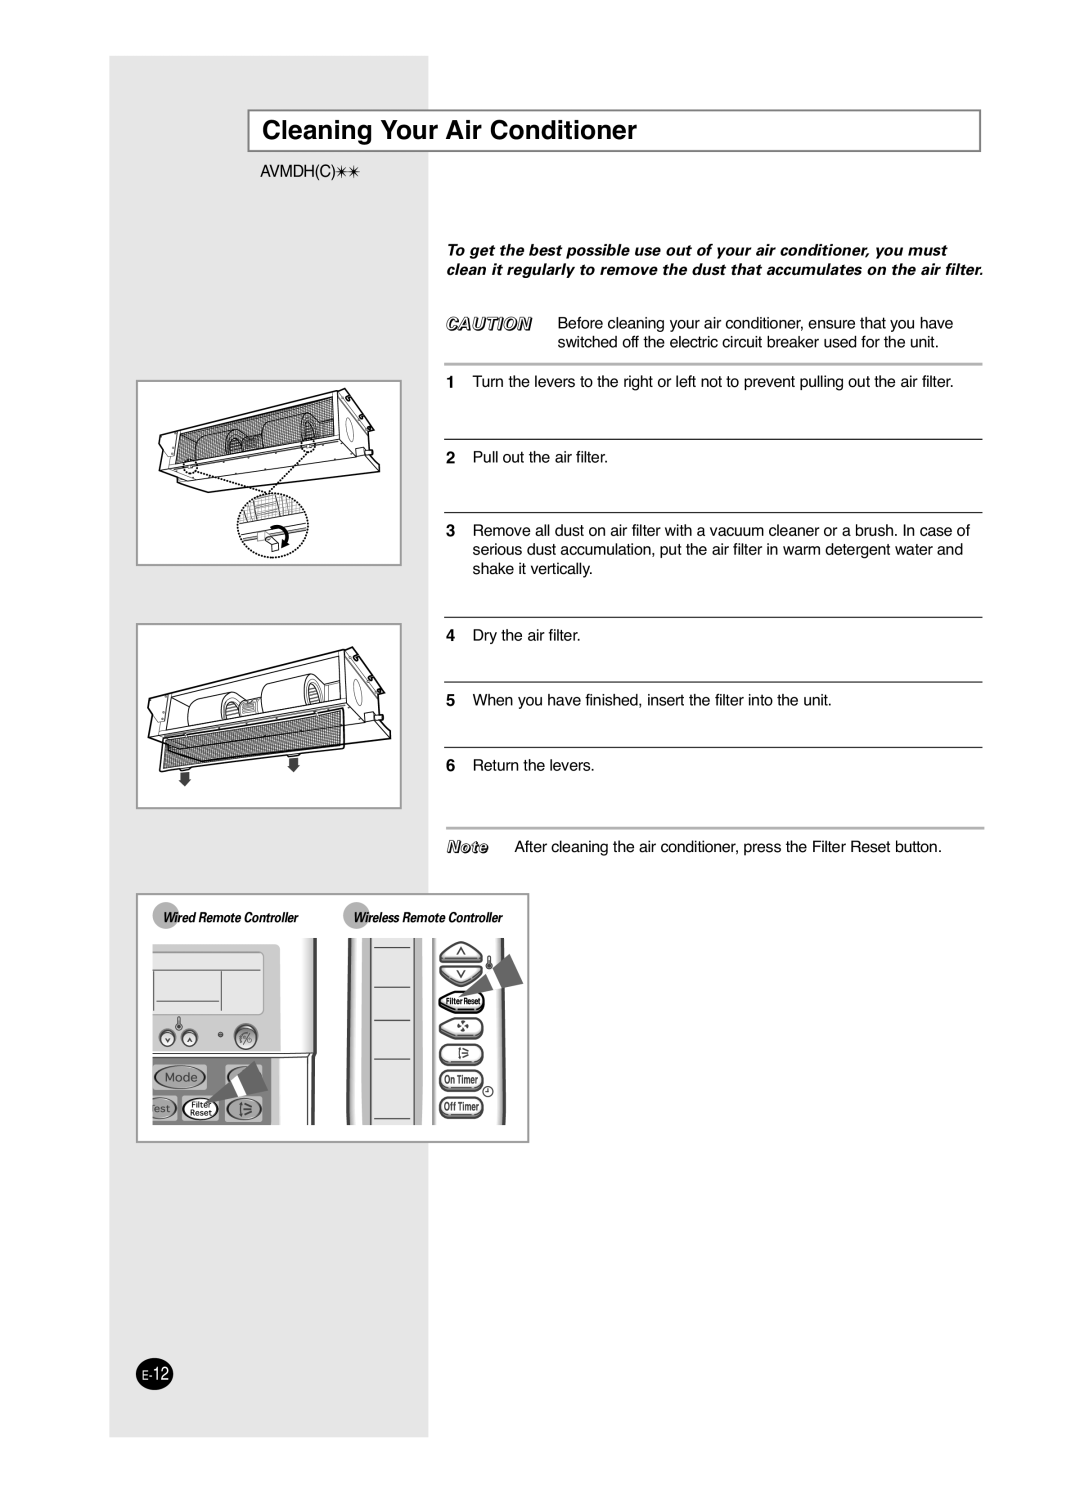 Samsung AVMDH(C) user manual Cleaning Your Air Conditioner, Avmdhc 